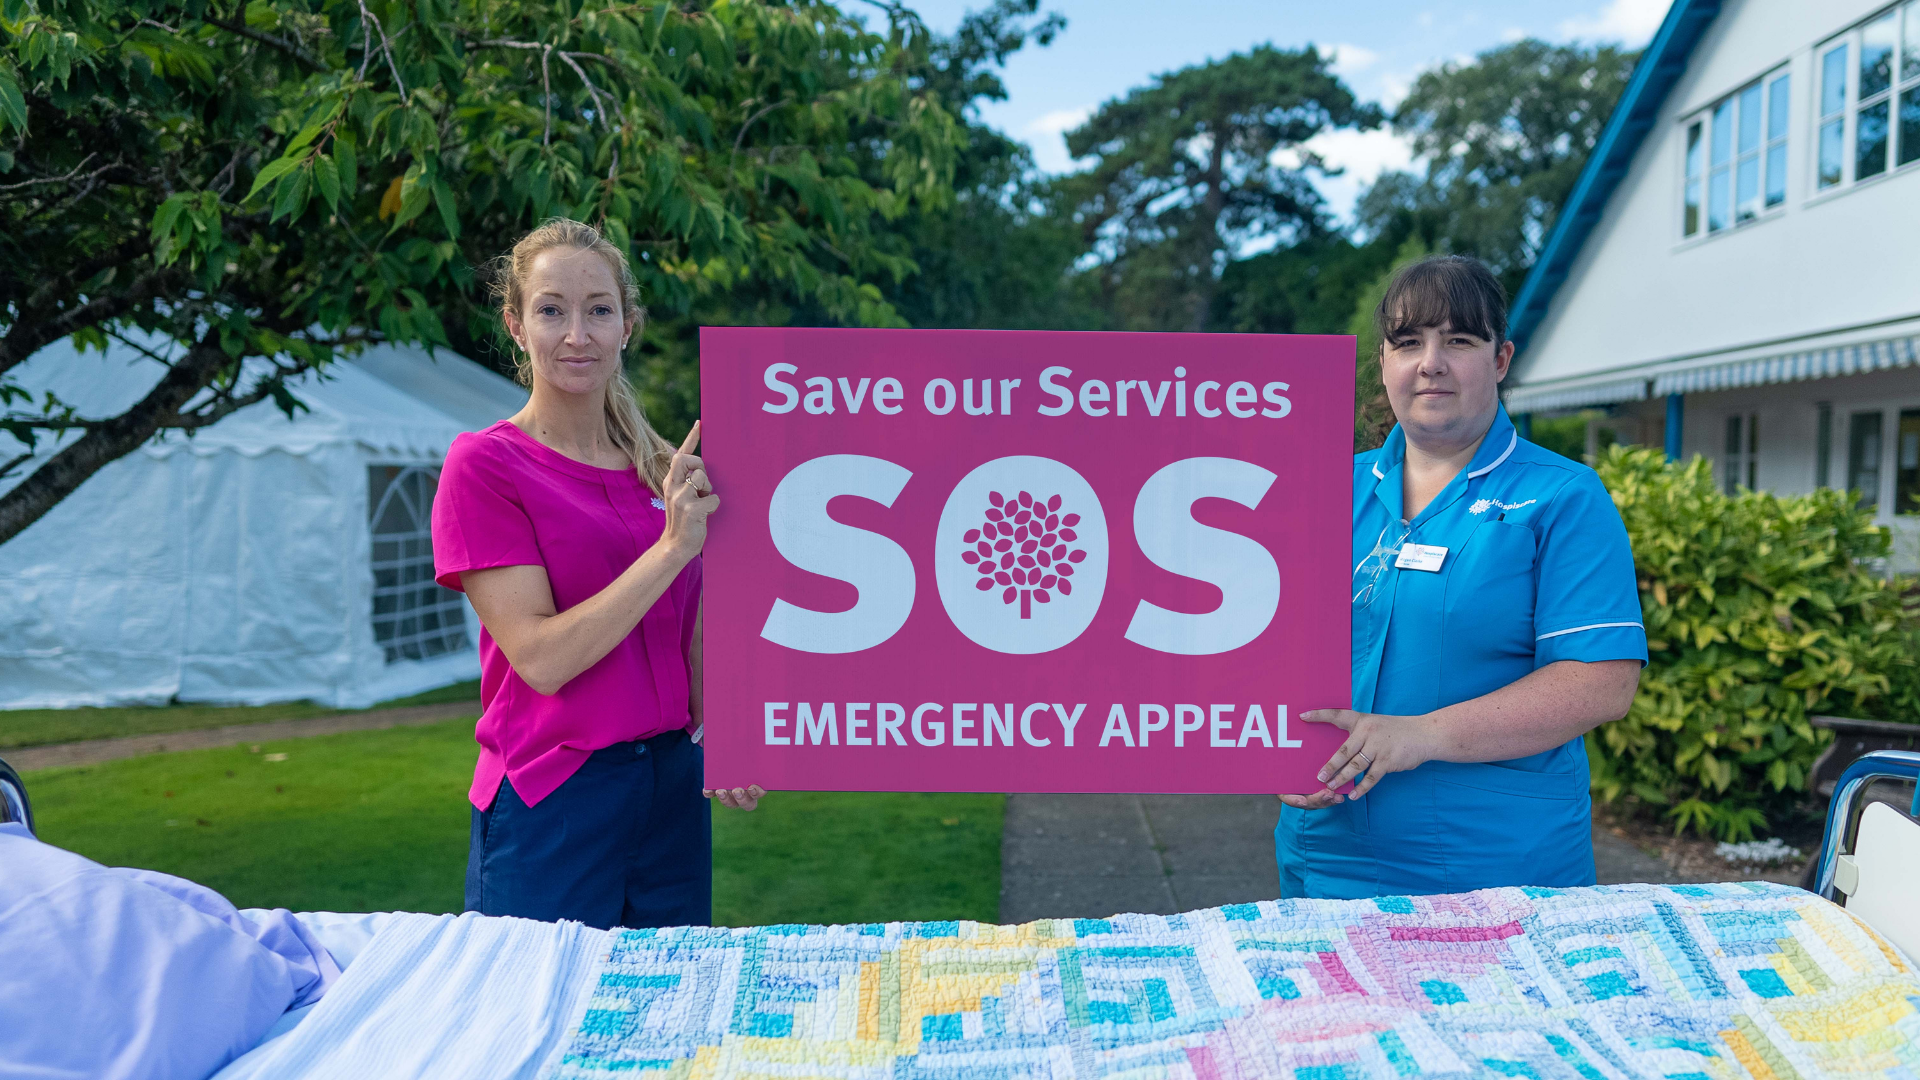 Hospiscare Launches ‘Save our Services’ Appeal